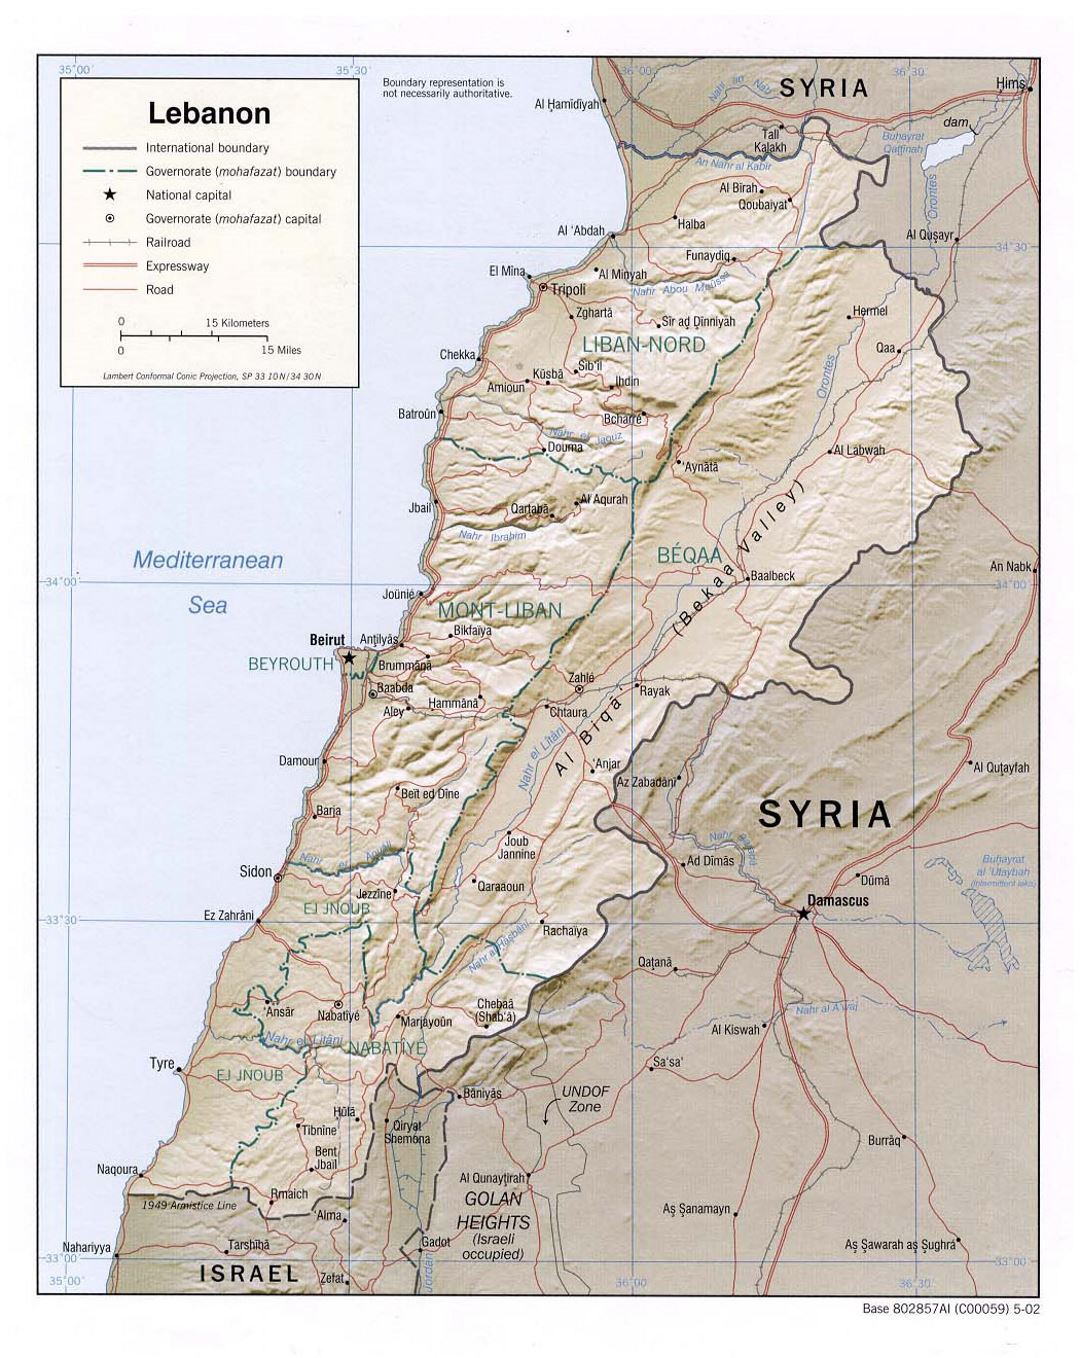 Detailed political and administrative map of Lebanon with relief, roads, railroads and major cities - 2002